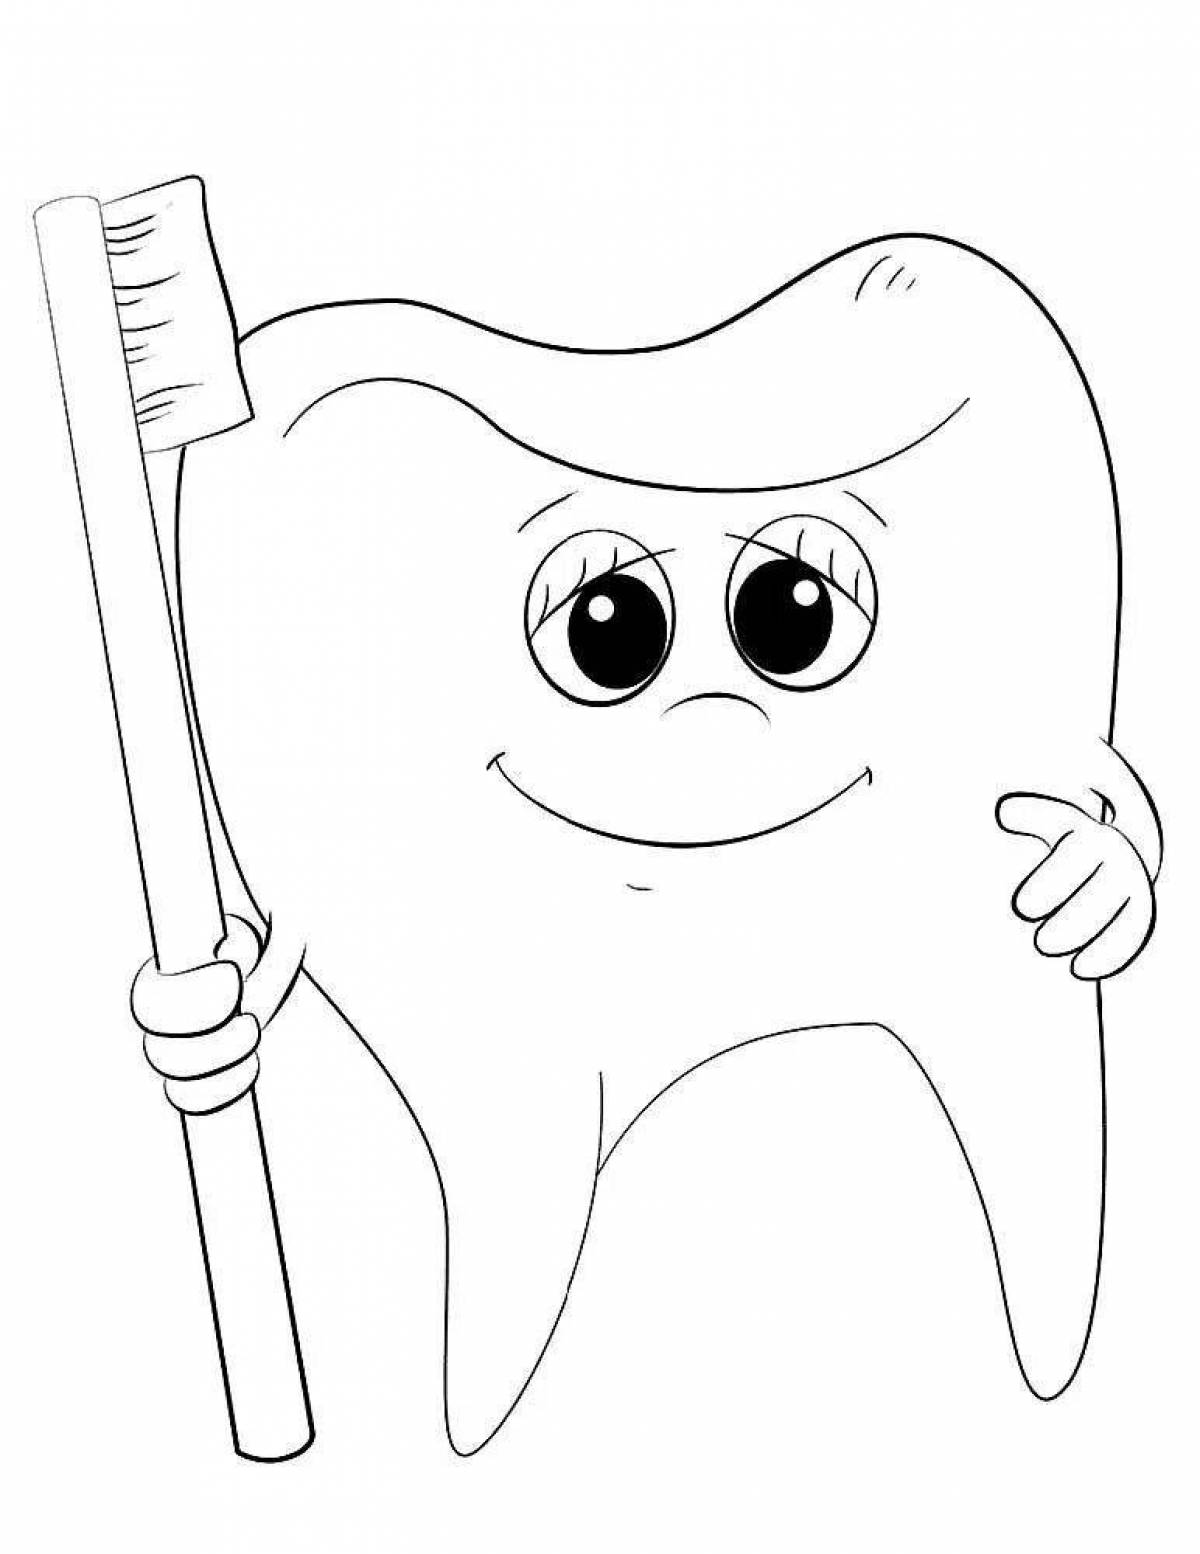 Shiny tooth coloring book